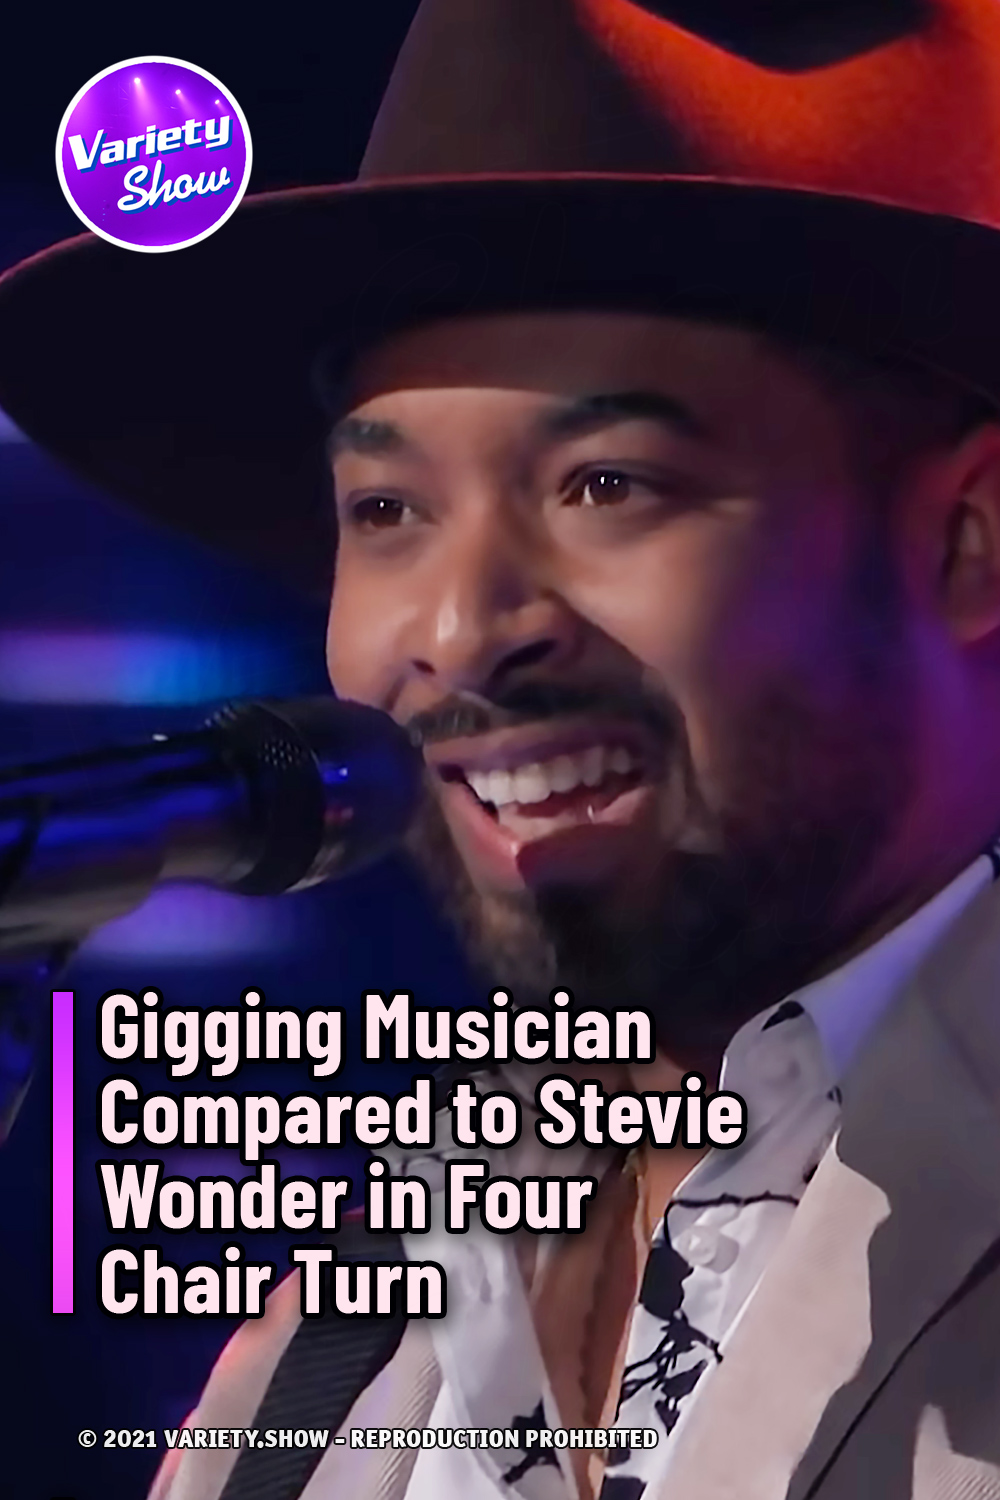 Gigging Musician Compared to Stevie Wonder in Four Chair Turn